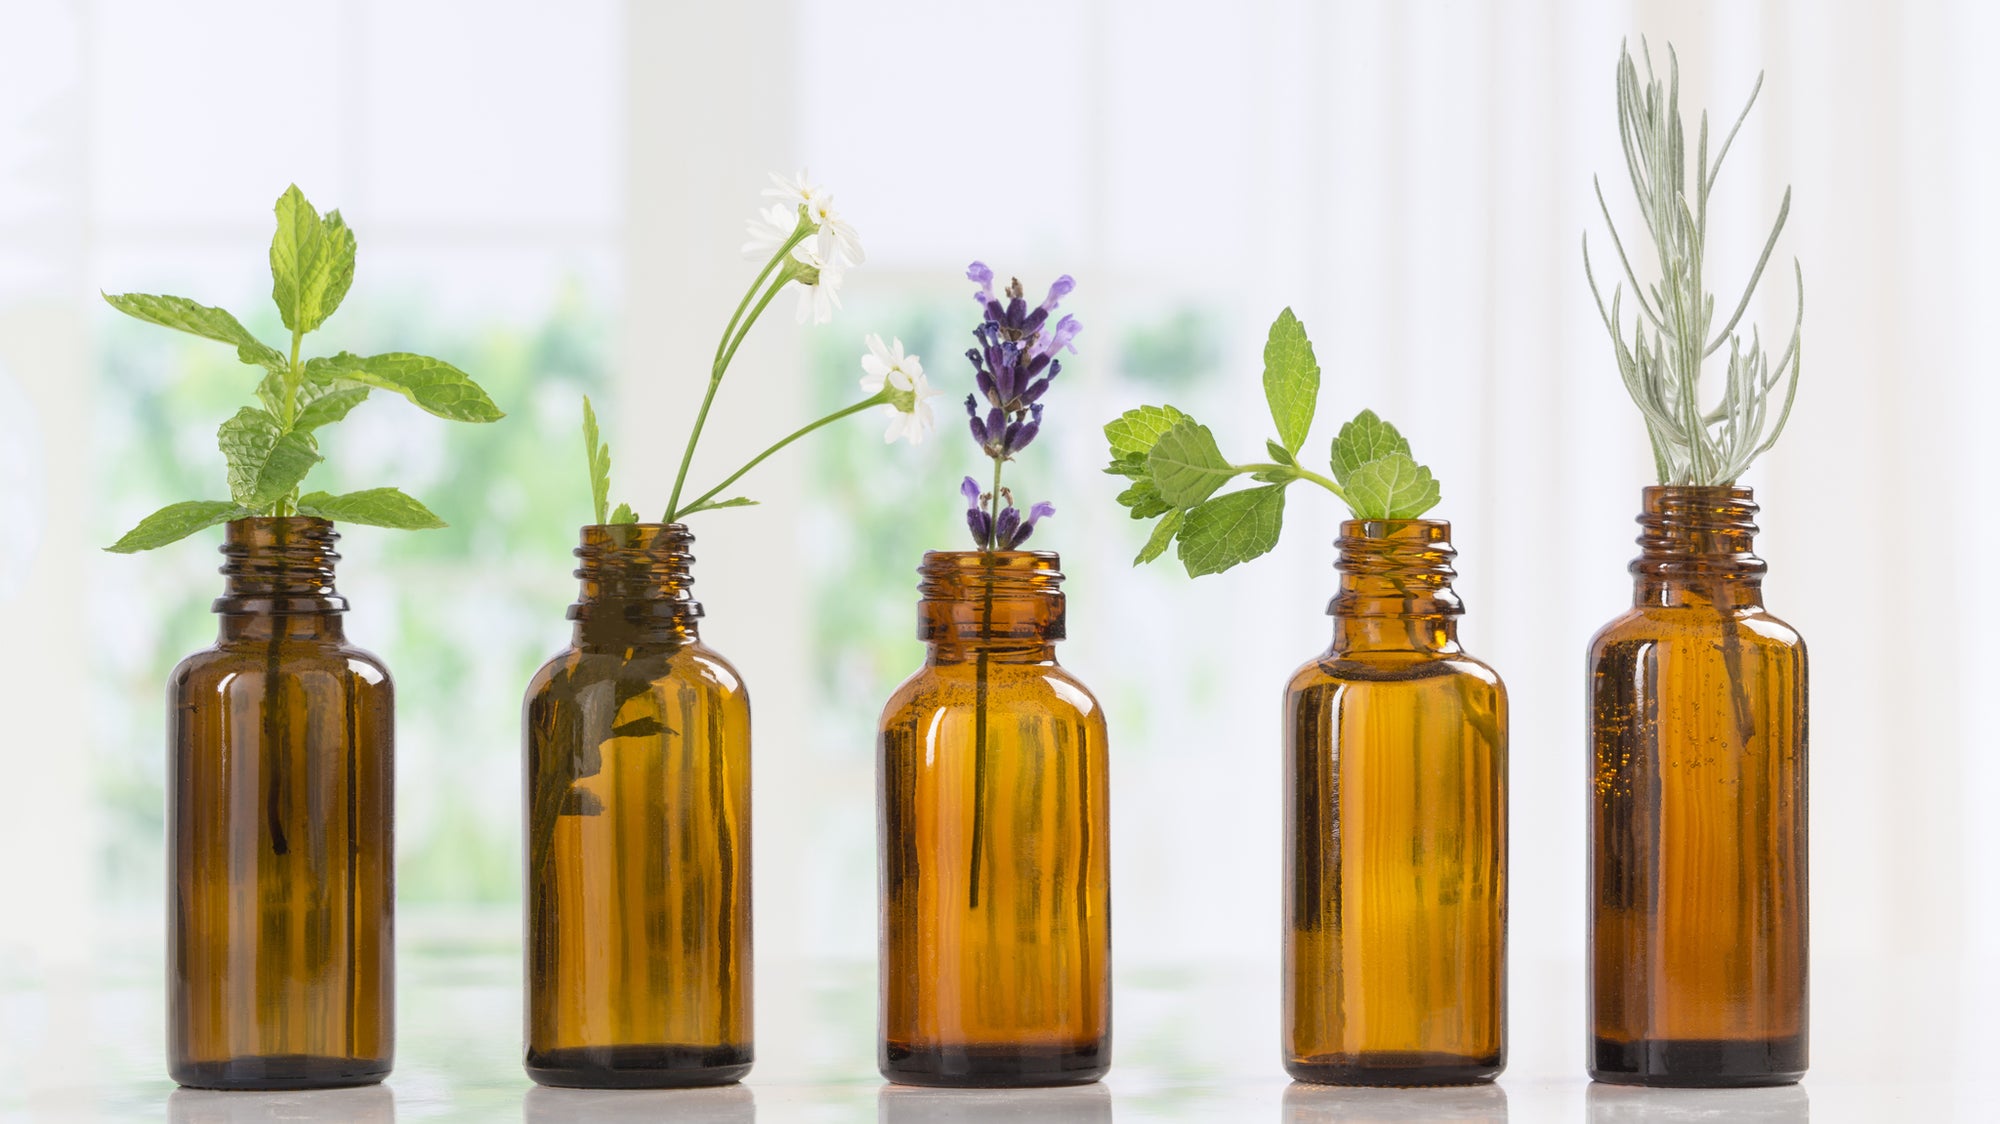 How To Use Essential Oils To Relieve Pain?